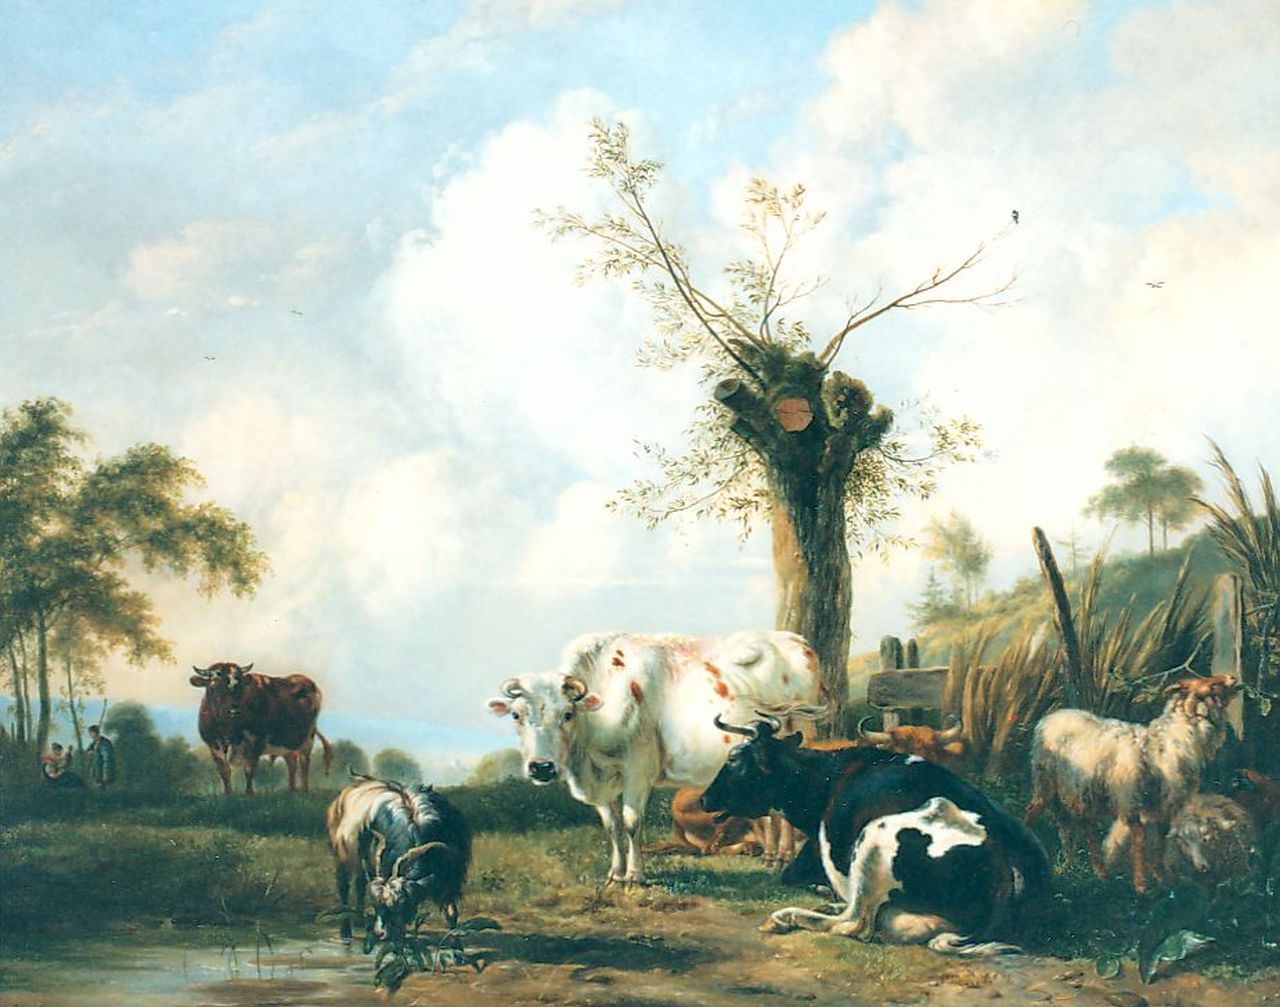 Os P.G. van | Pieter Gerardus van Os, Cattle in a landscape, oil on panel 84.5 x 105.8 cm, signed l.l. and dated 1837